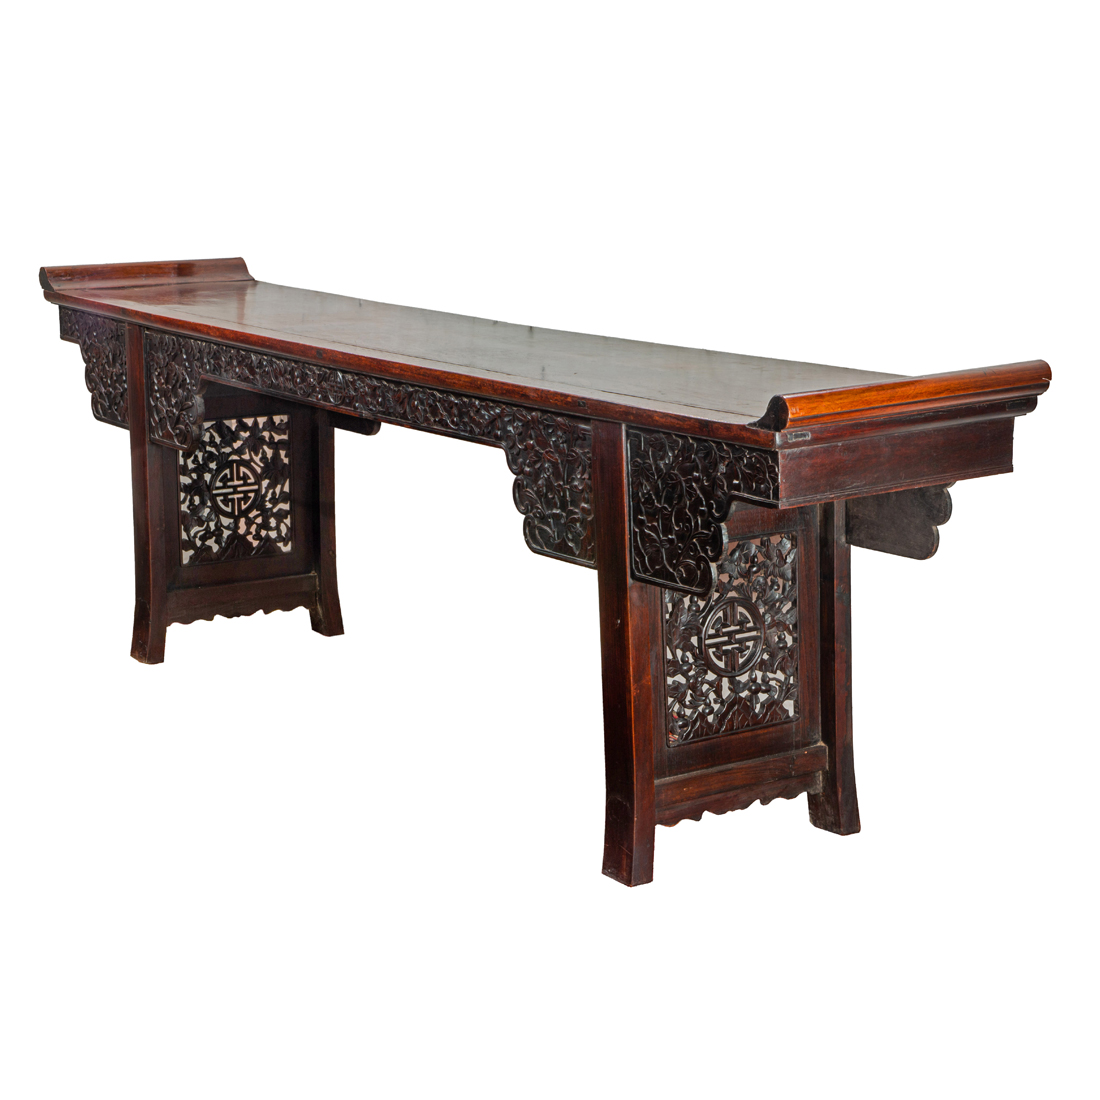 LARGE CHINESE HARDWOOD ALTAR TABLE 2d2beb